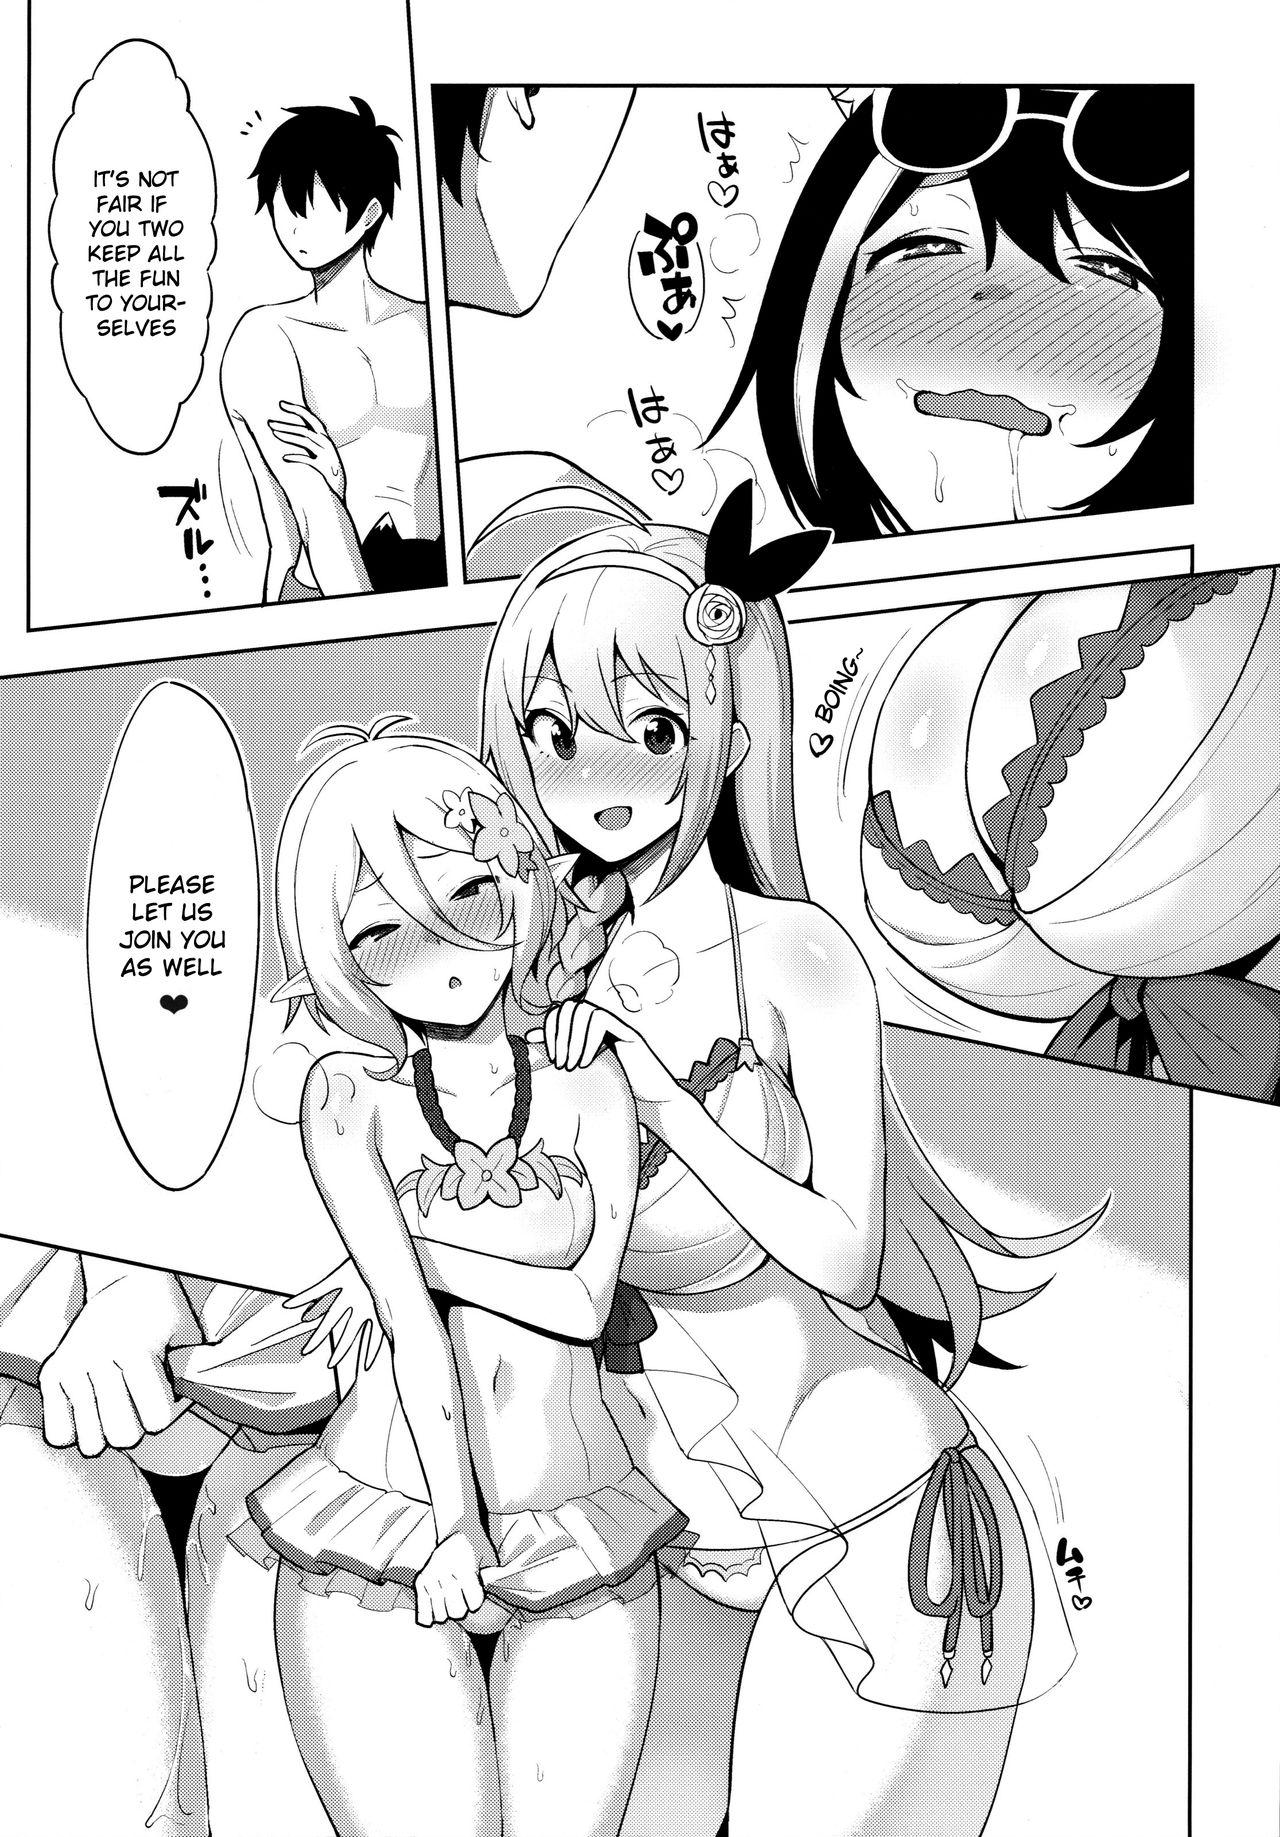 Love Making Princess to Connect Shitai! ReDive! | I want to connect with a princess! ReDive! - Princess connect Masseur - Page 6